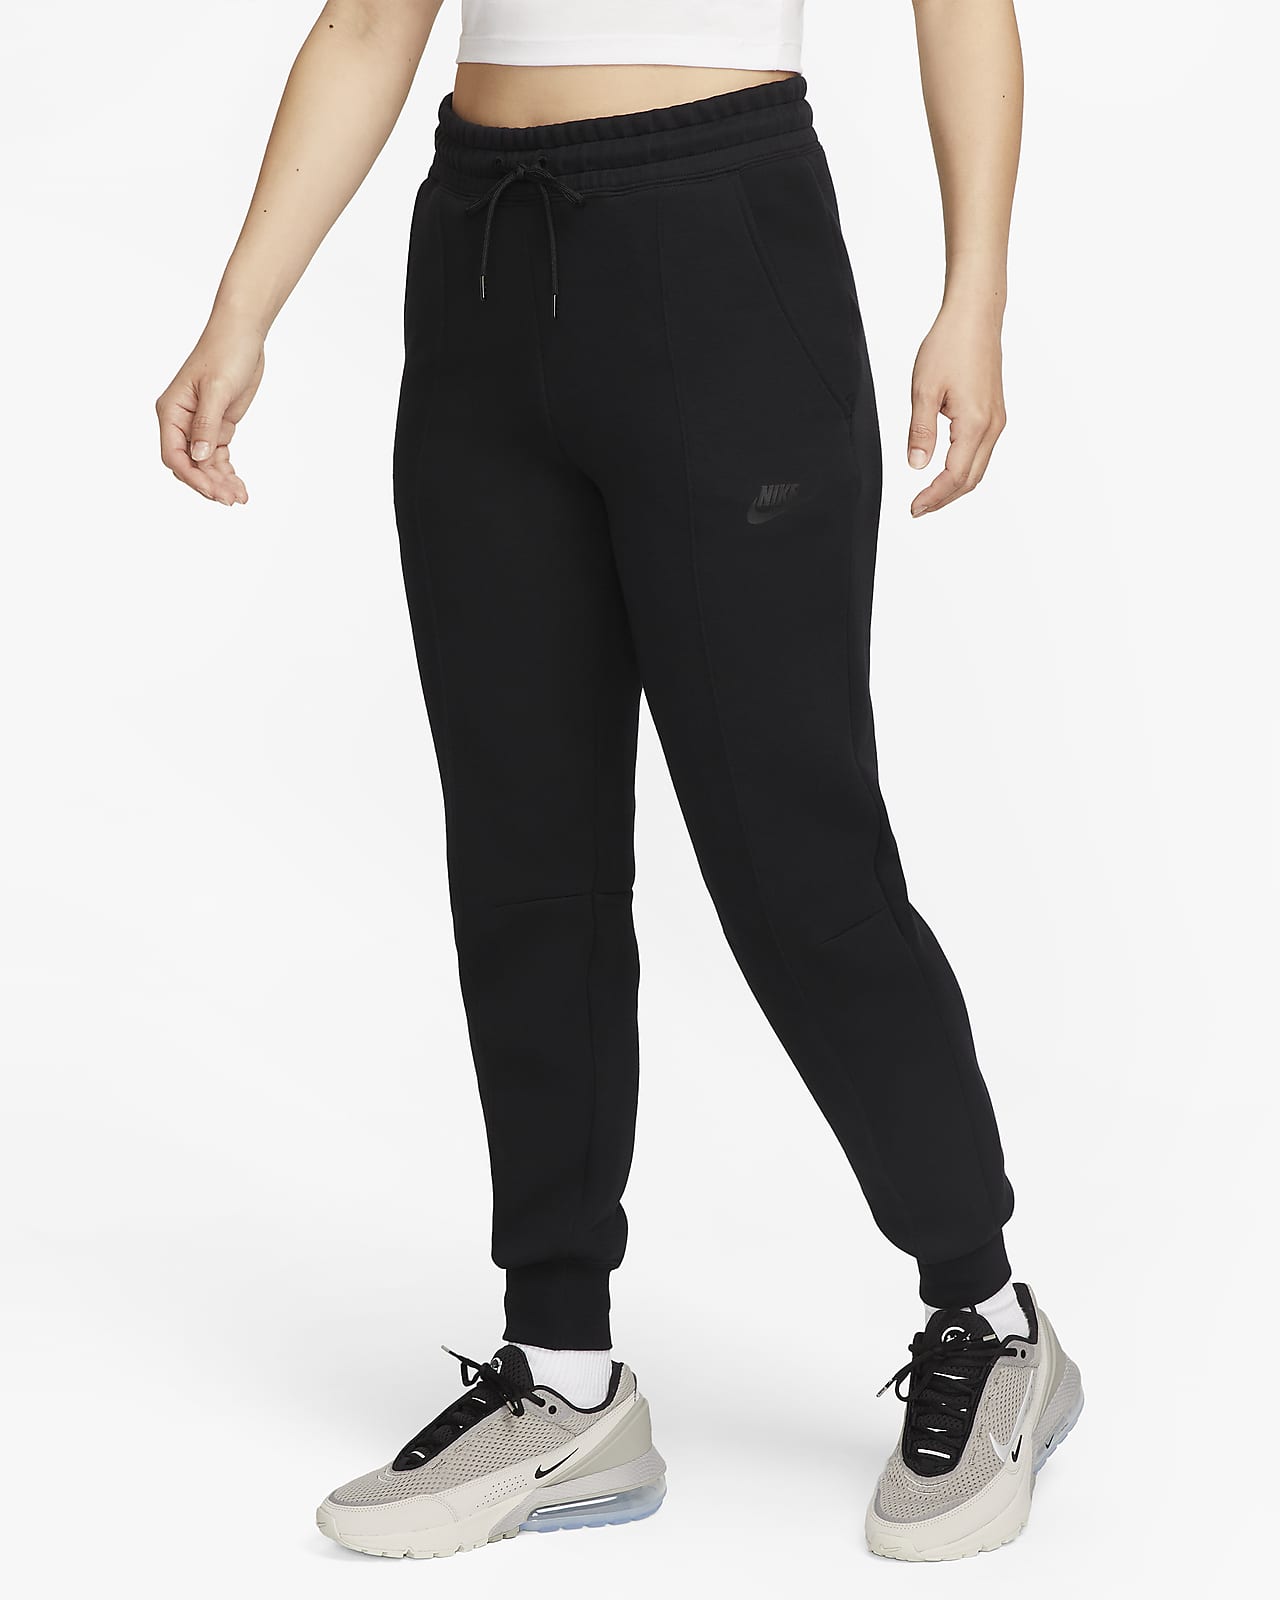 Dollar Missy Women's Jogger Pant CC 821 – Online Shopping site in India